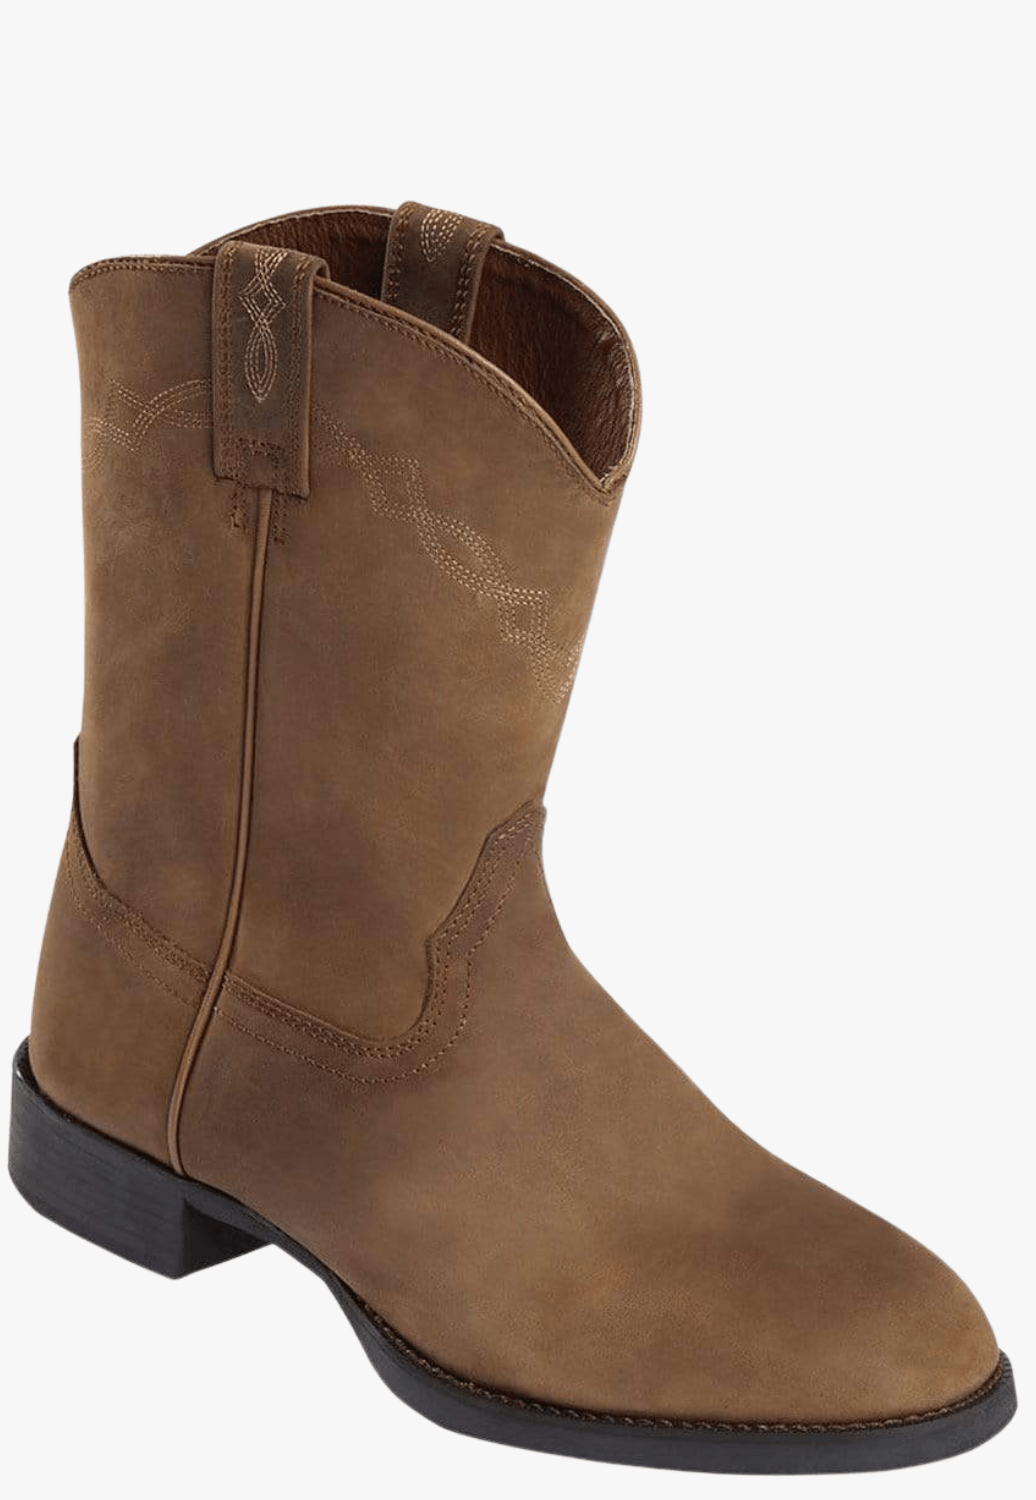 Thomas Cook FOOTWEAR - Mens Western Boots Thomas Cook Mens All Rounder Roper Top Boot